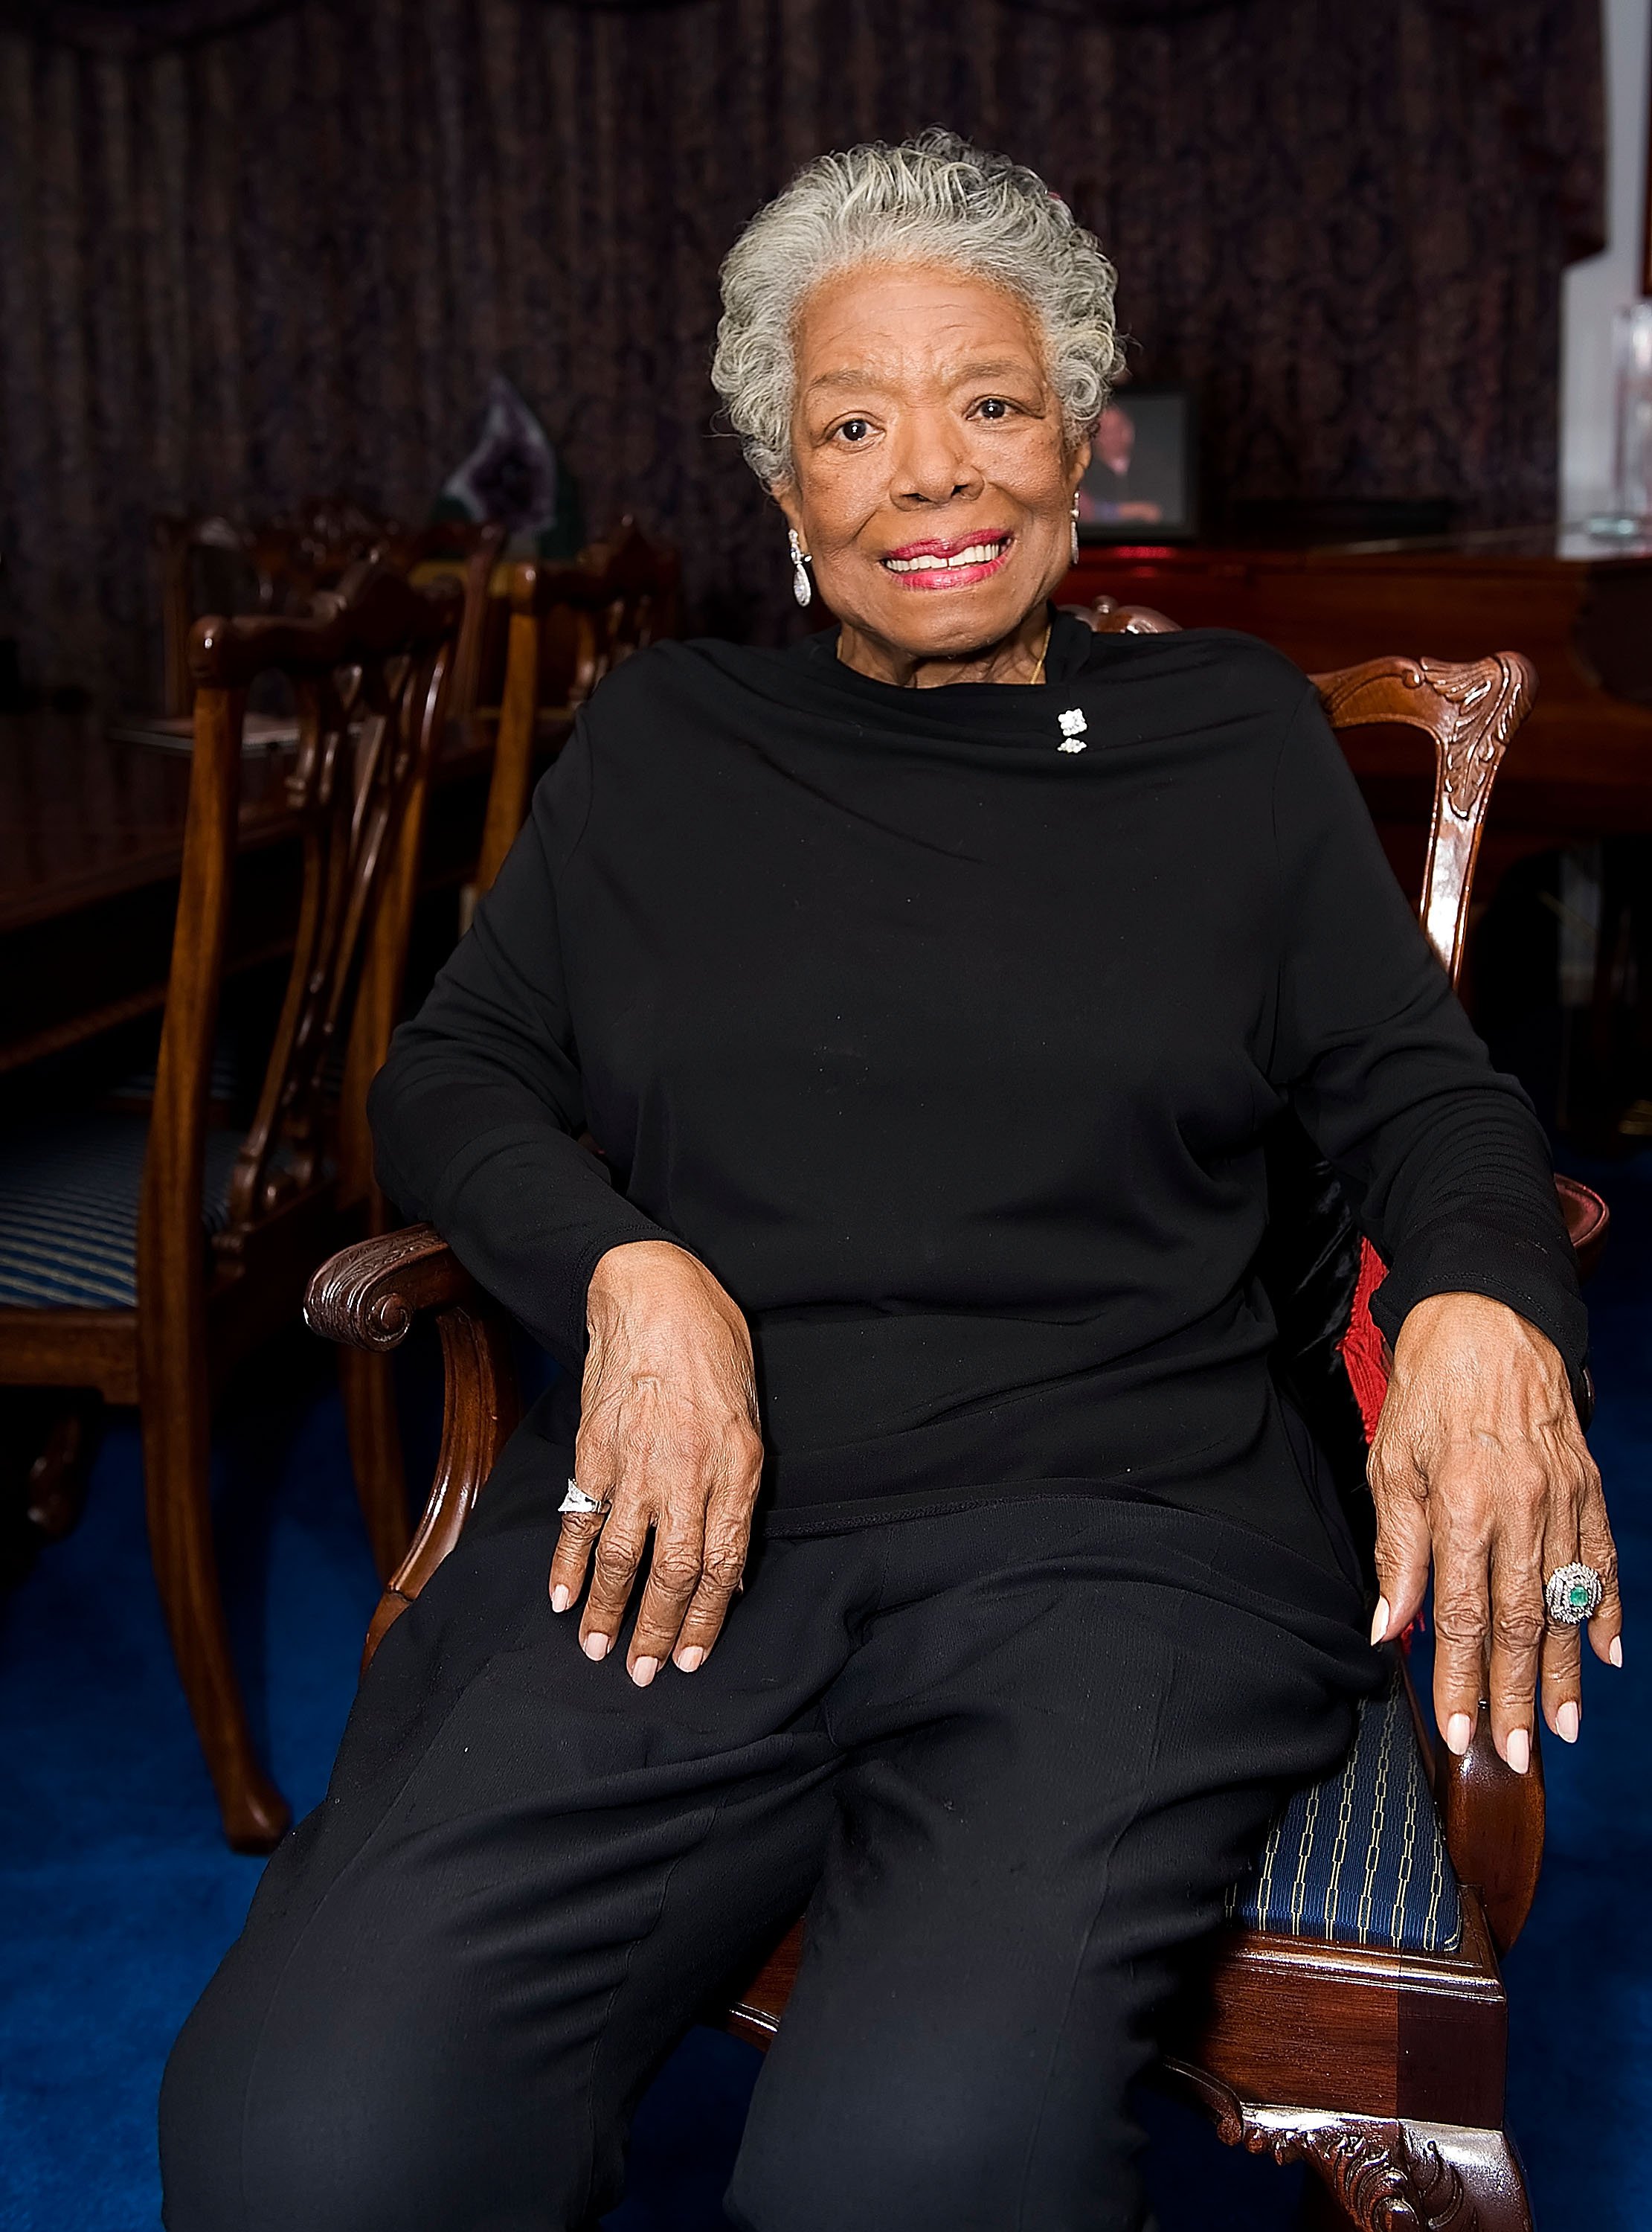 Maya Angelou poses for The Michael Jackson Tribute Portrait at Dr. Angelou's home June 21, 2010 | Photo: Getty Images